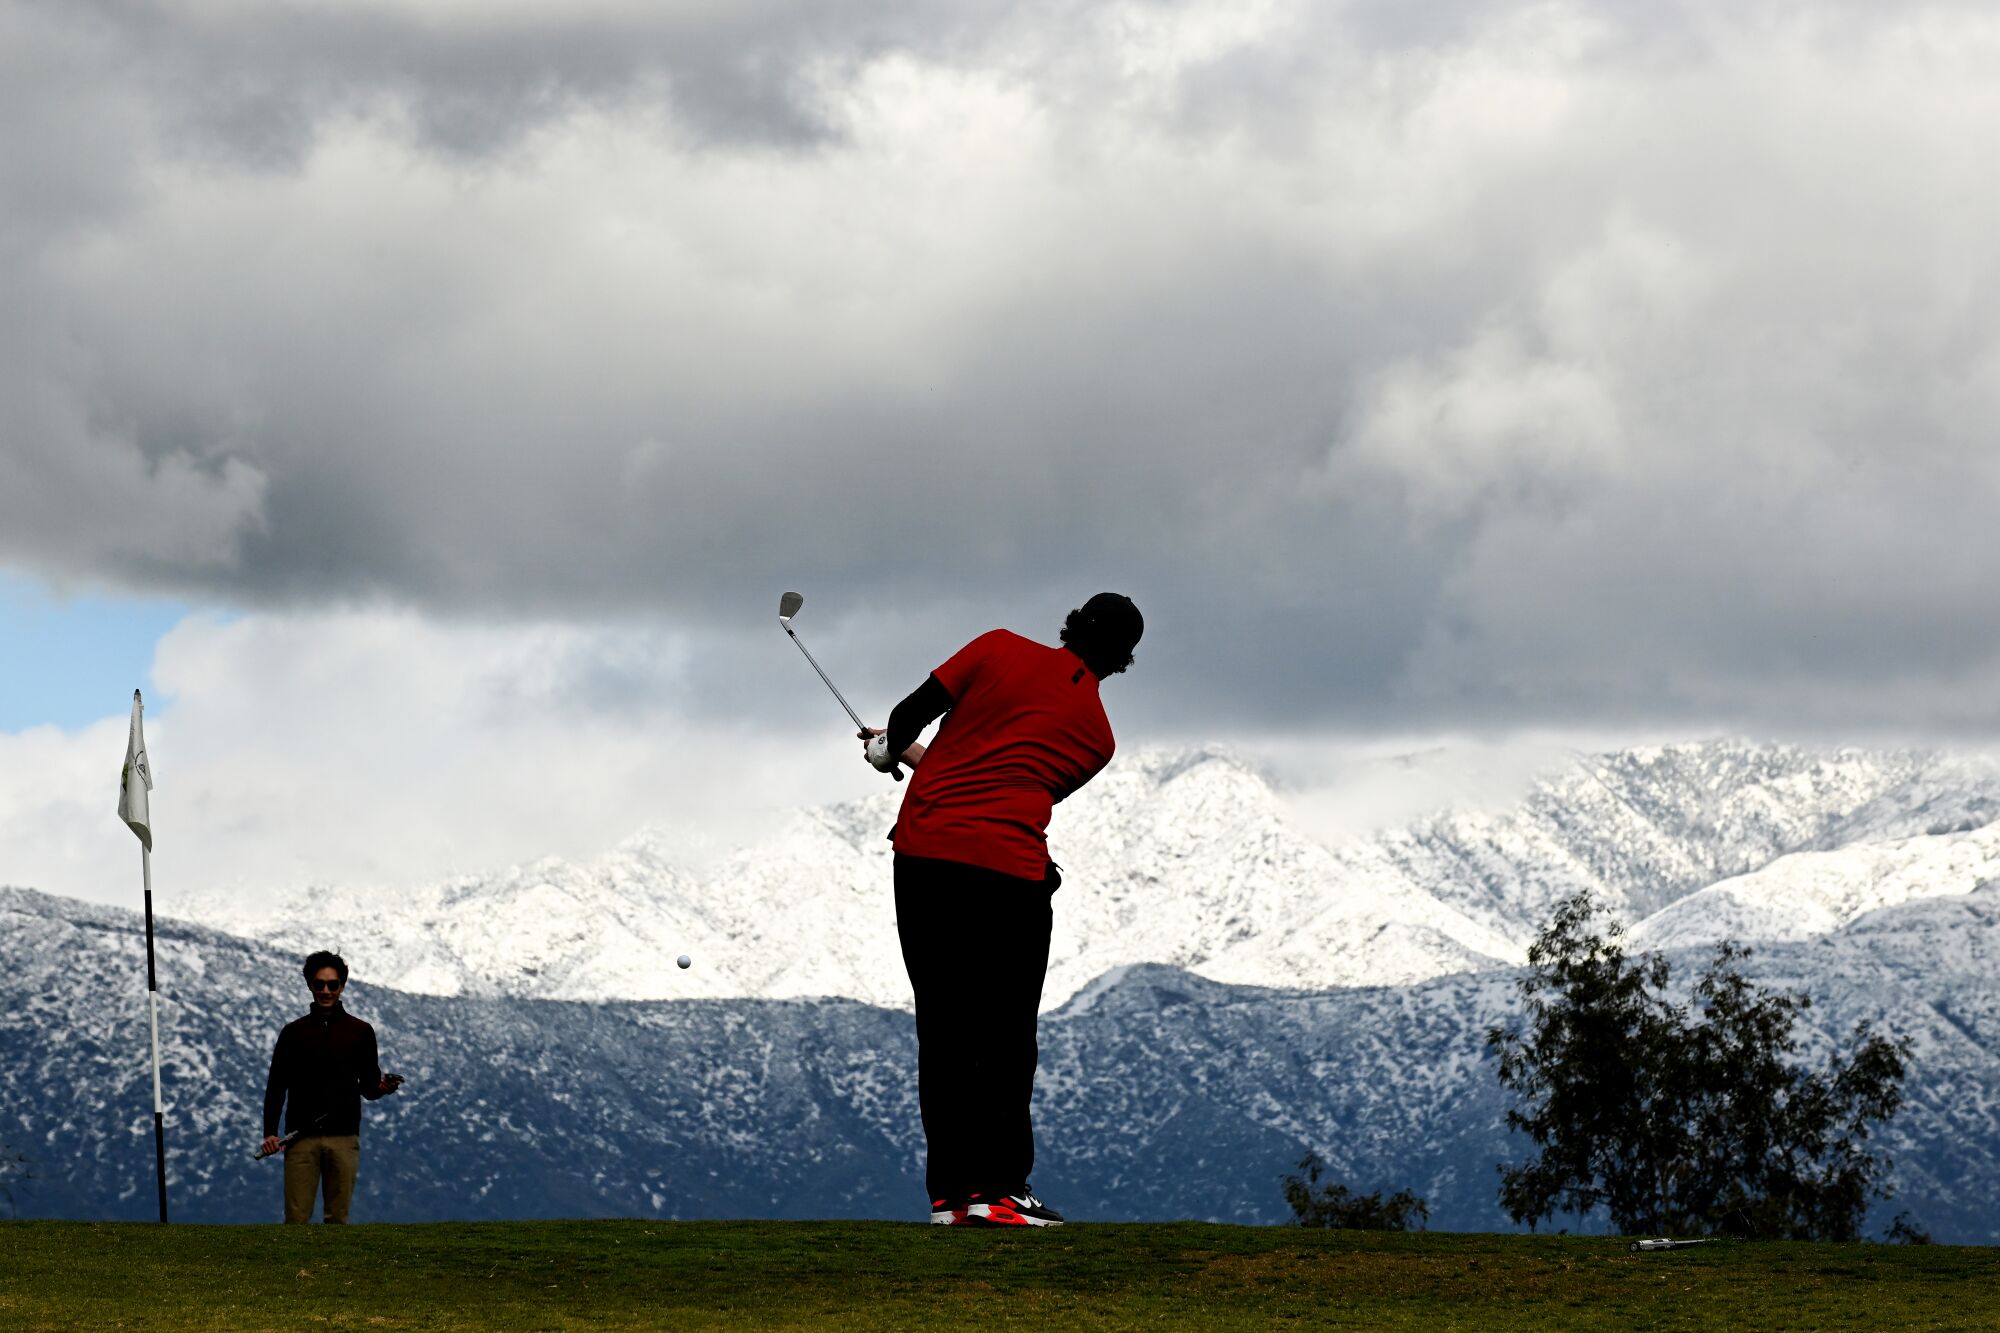 A golfer mid-swing on a cloudy day with snowy mountains in the background